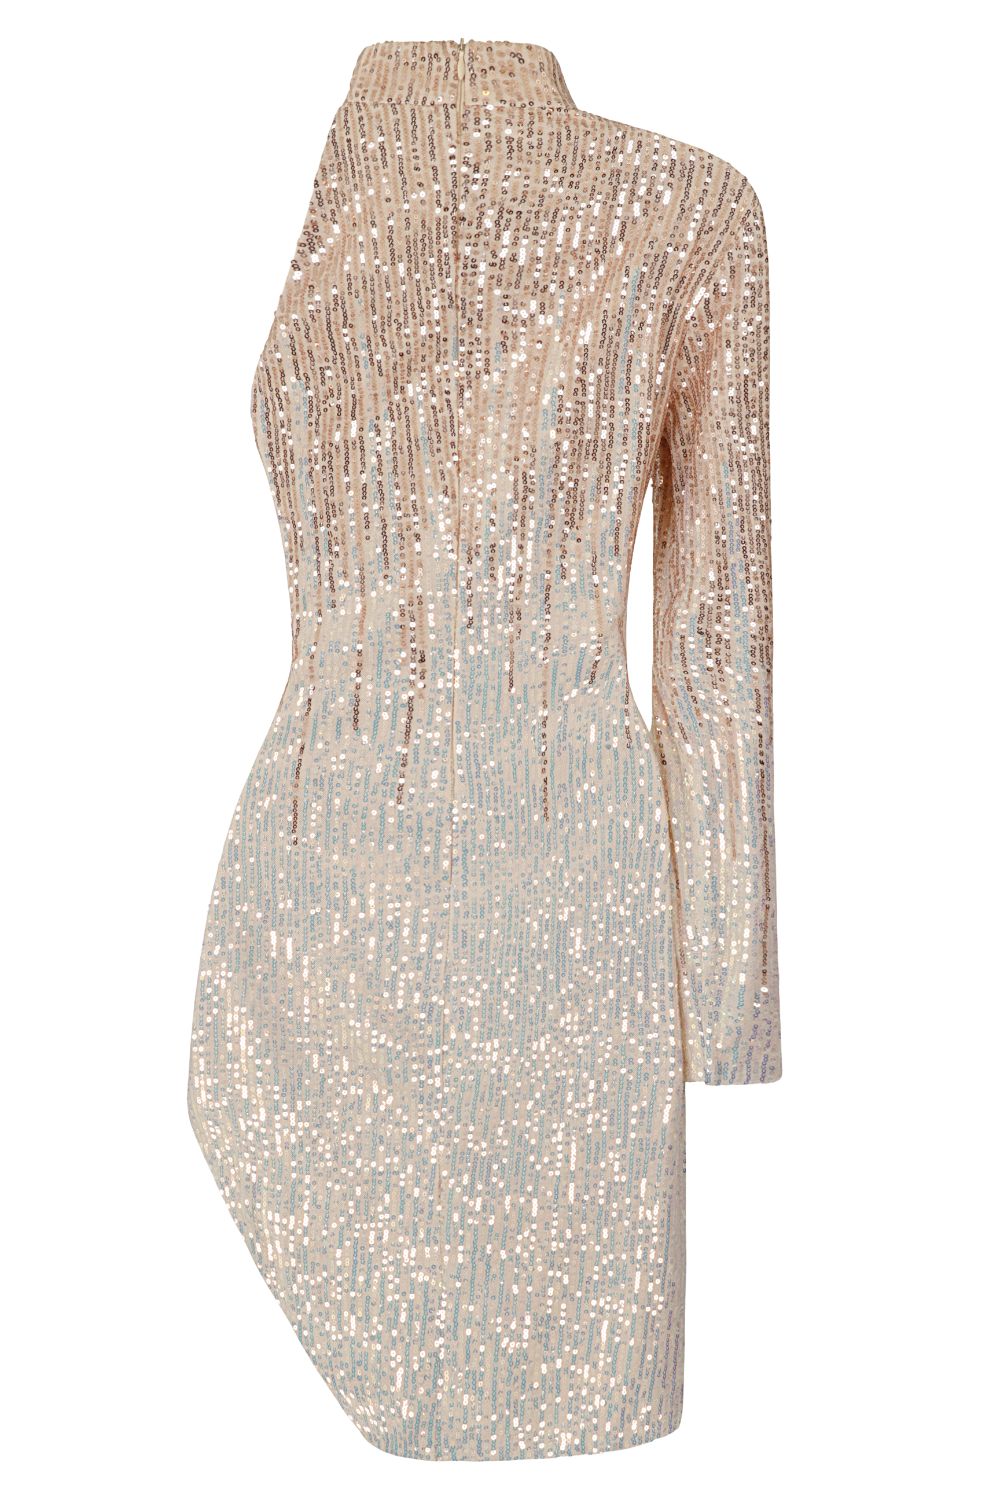 Be Mine Rose Gold Silver Ombre Sequin Keyhole One Sleeve Dress